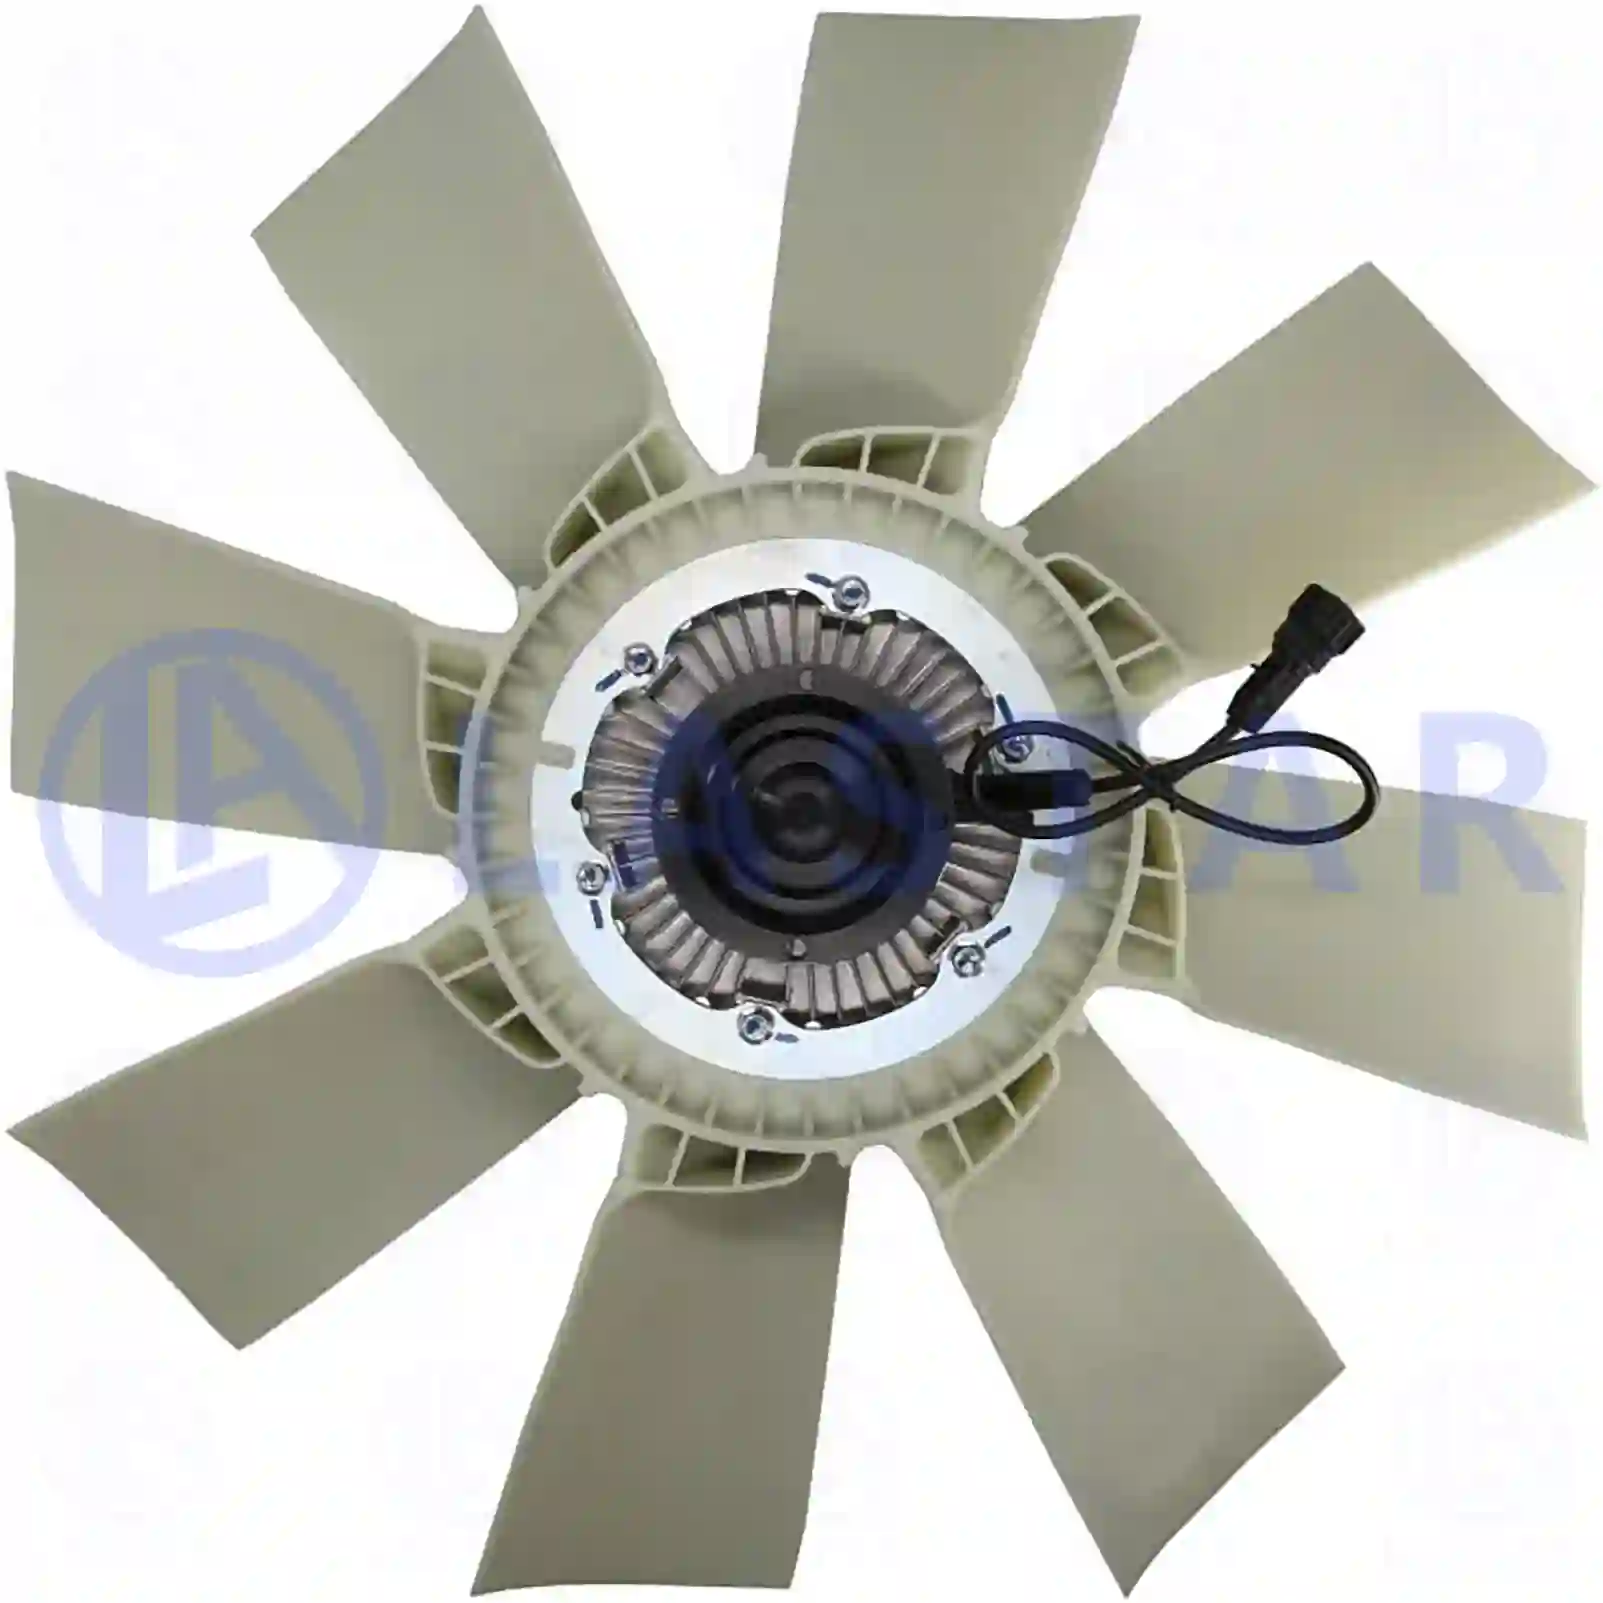 Fan with clutch, 77709095, 7420981232, 7421037403, 20466635, 20517753, 20805997, 20981227, 21037403, 85000098, 85000282, 85000586, 85000739, 85000818, ZG00400-0008 ||  77709095 Lastar Spare Part | Truck Spare Parts, Auotomotive Spare Parts Fan with clutch, 77709095, 7420981232, 7421037403, 20466635, 20517753, 20805997, 20981227, 21037403, 85000098, 85000282, 85000586, 85000739, 85000818, ZG00400-0008 ||  77709095 Lastar Spare Part | Truck Spare Parts, Auotomotive Spare Parts